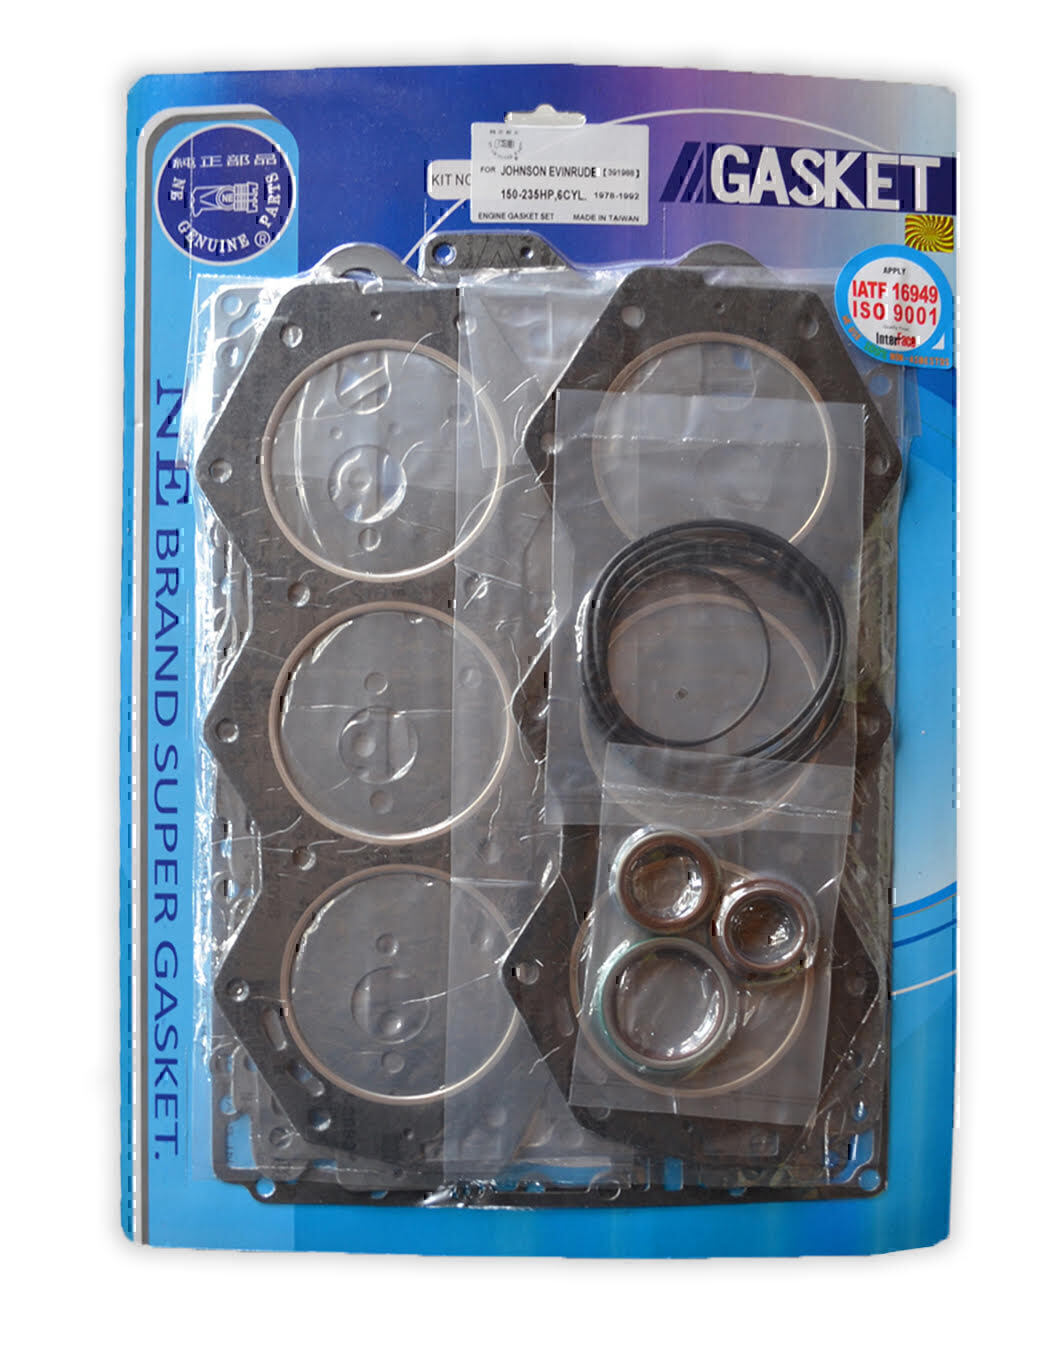 COMPLETE GASKET KIT FOR EVINRUDE JOHNSON 150HP - 235HP 6 CYL 1978 - 1992 1982 - 1985 OUTBOARD MOTOR